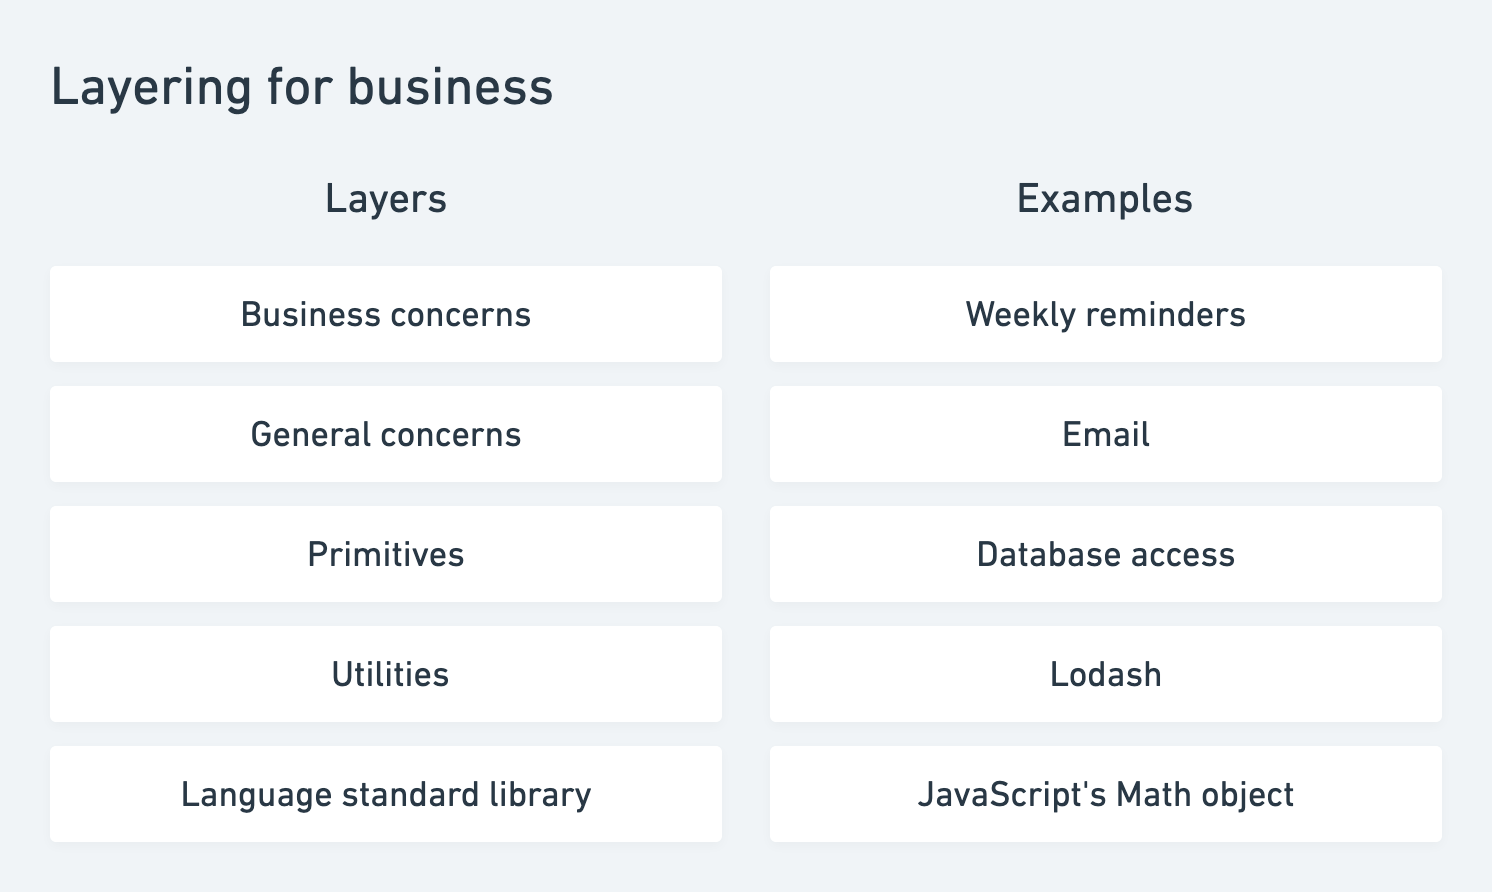 Layering for business. The layers are listed along with an example for each.